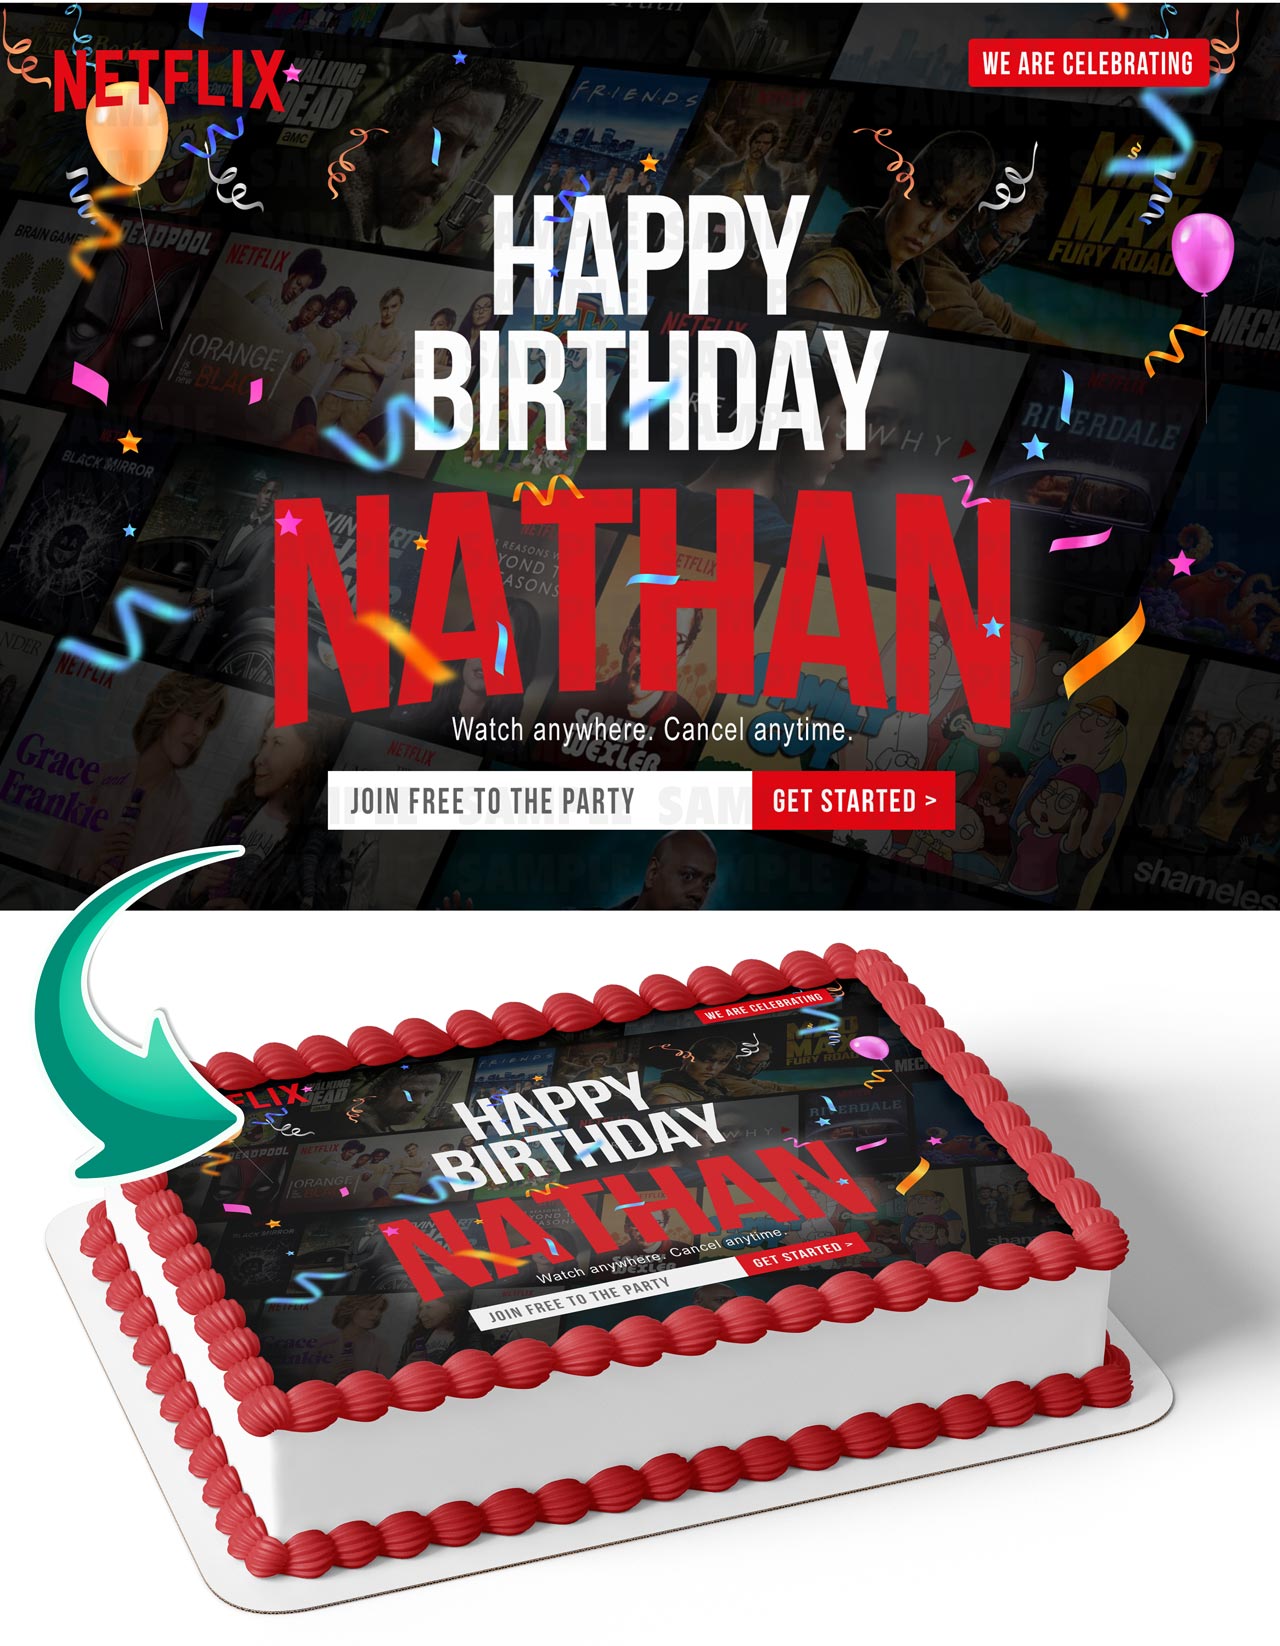 Some Birthday Help From Netflix! - Brite and Bubbly